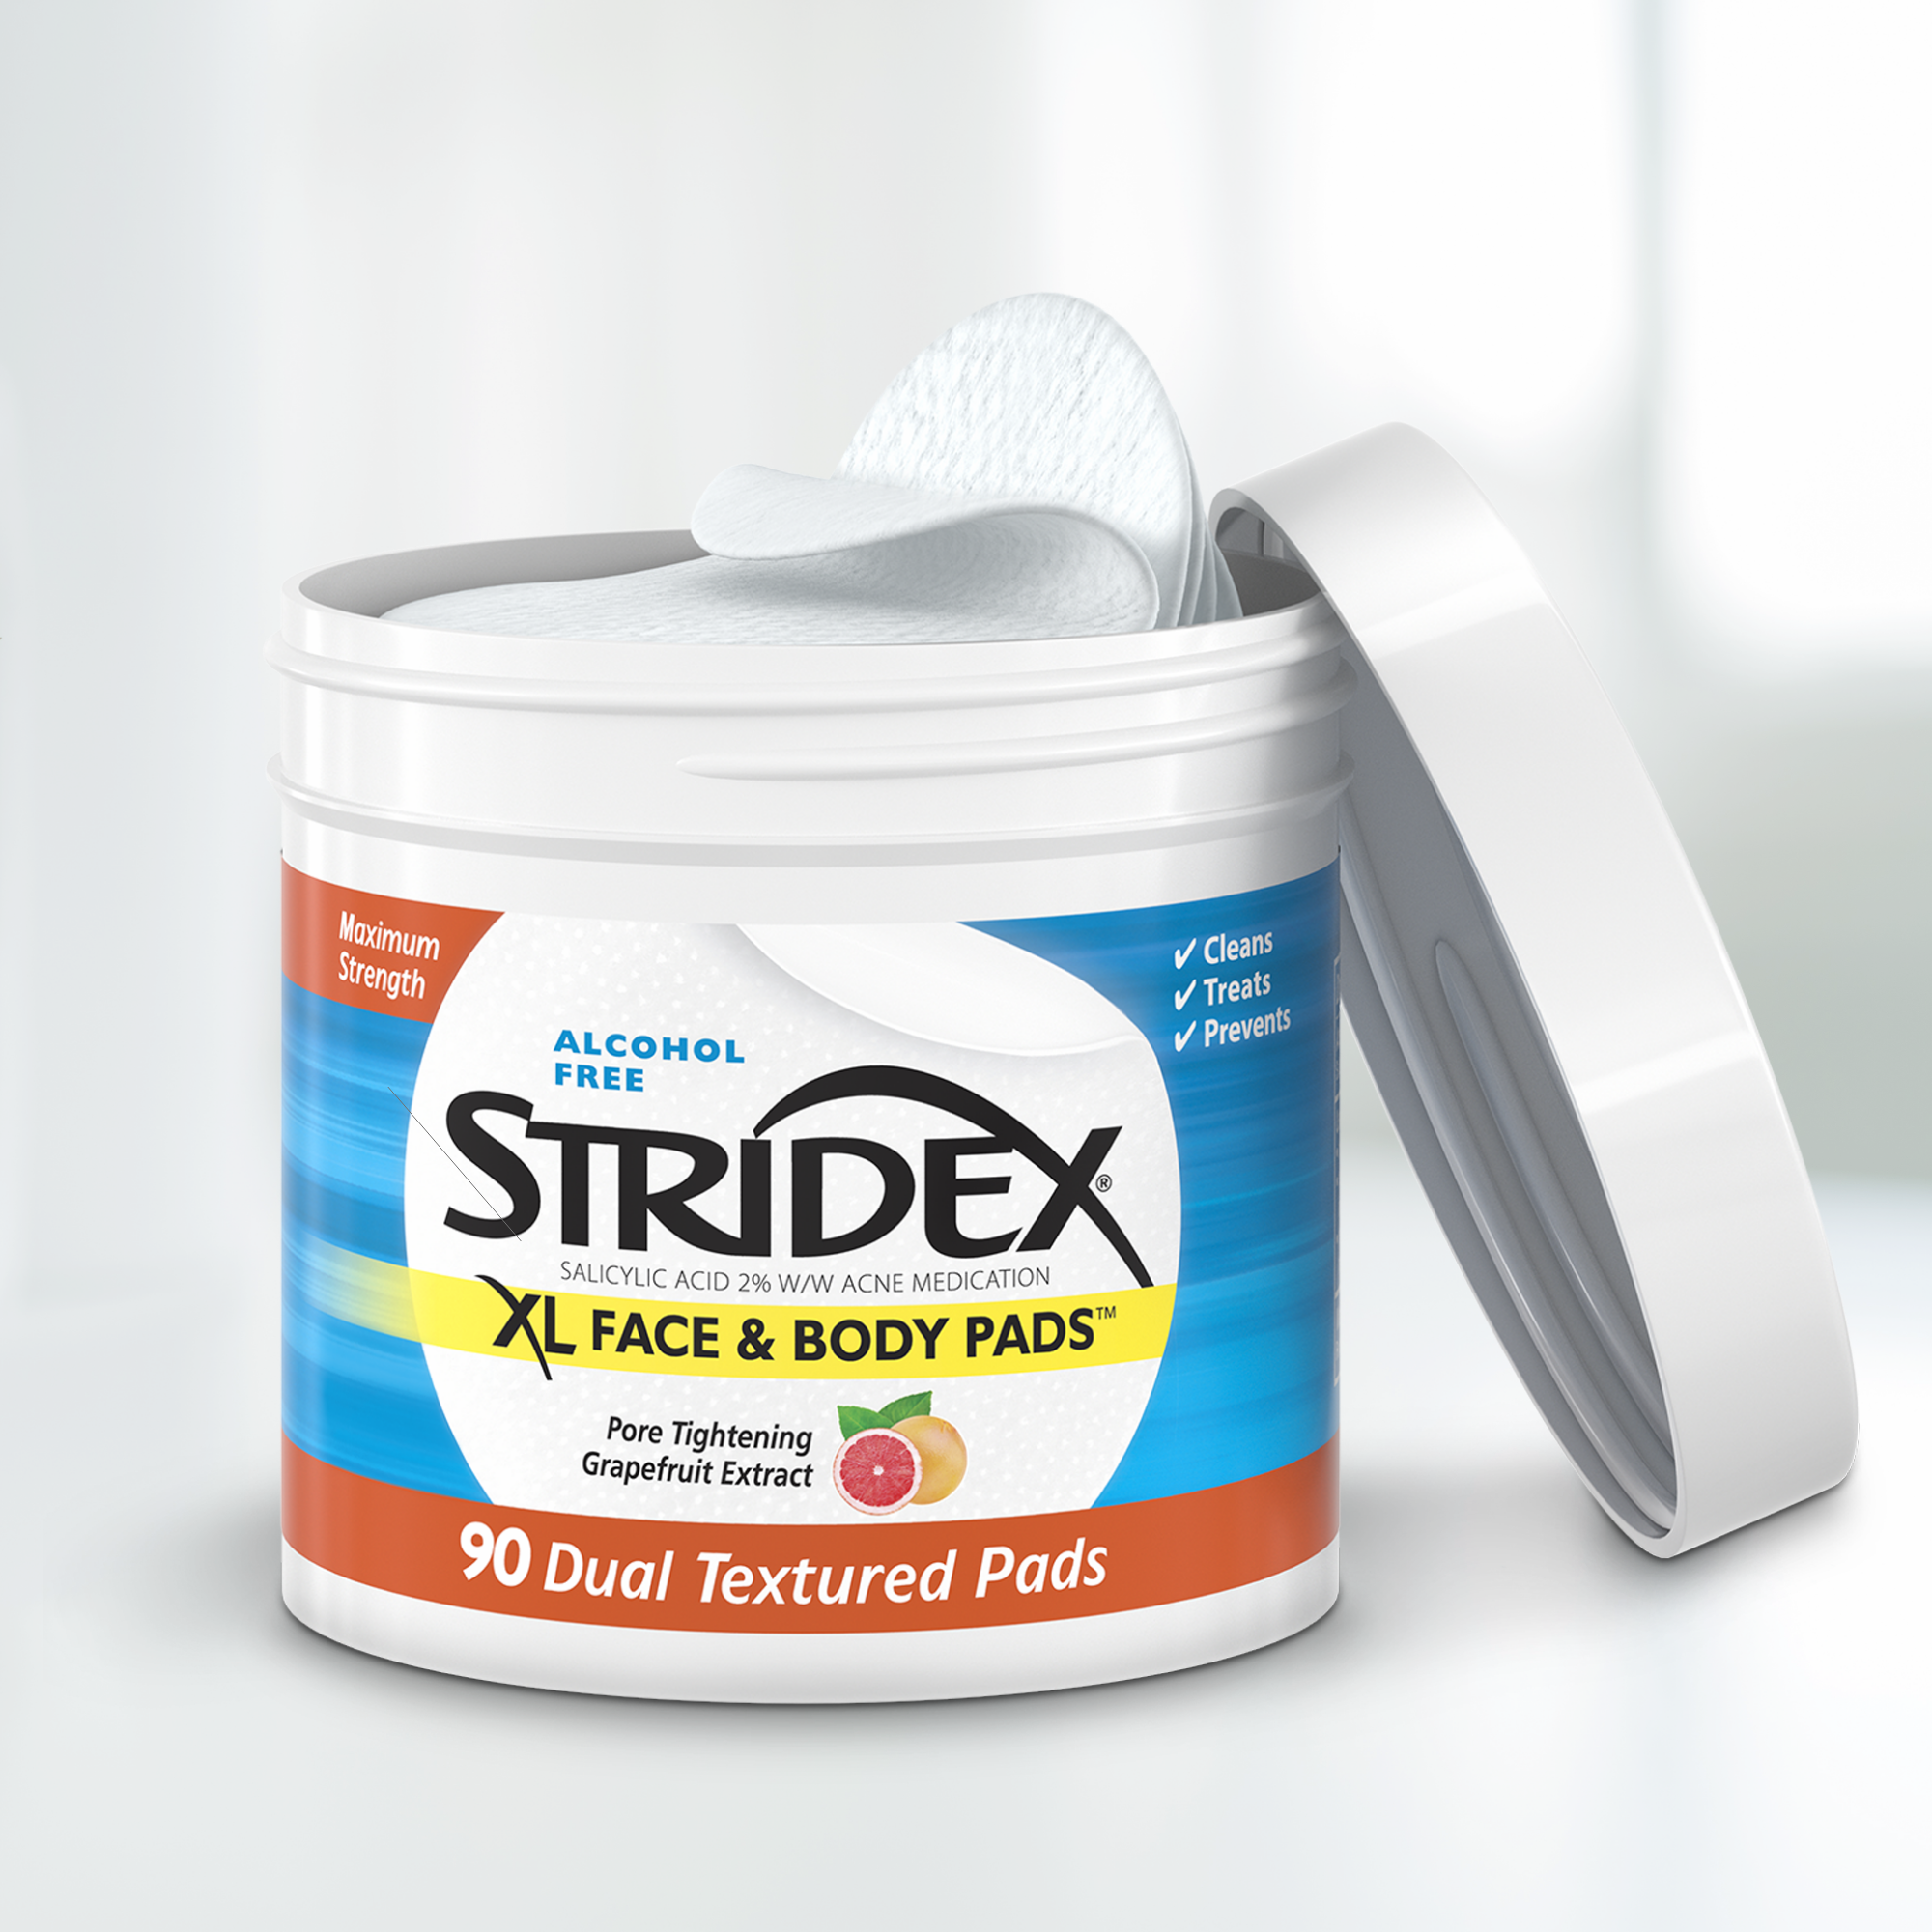 Stridex XL Acne Pads for Face and Body with Salicylic Acid, Alcohol Free, 90 Ct - image 2 of 12